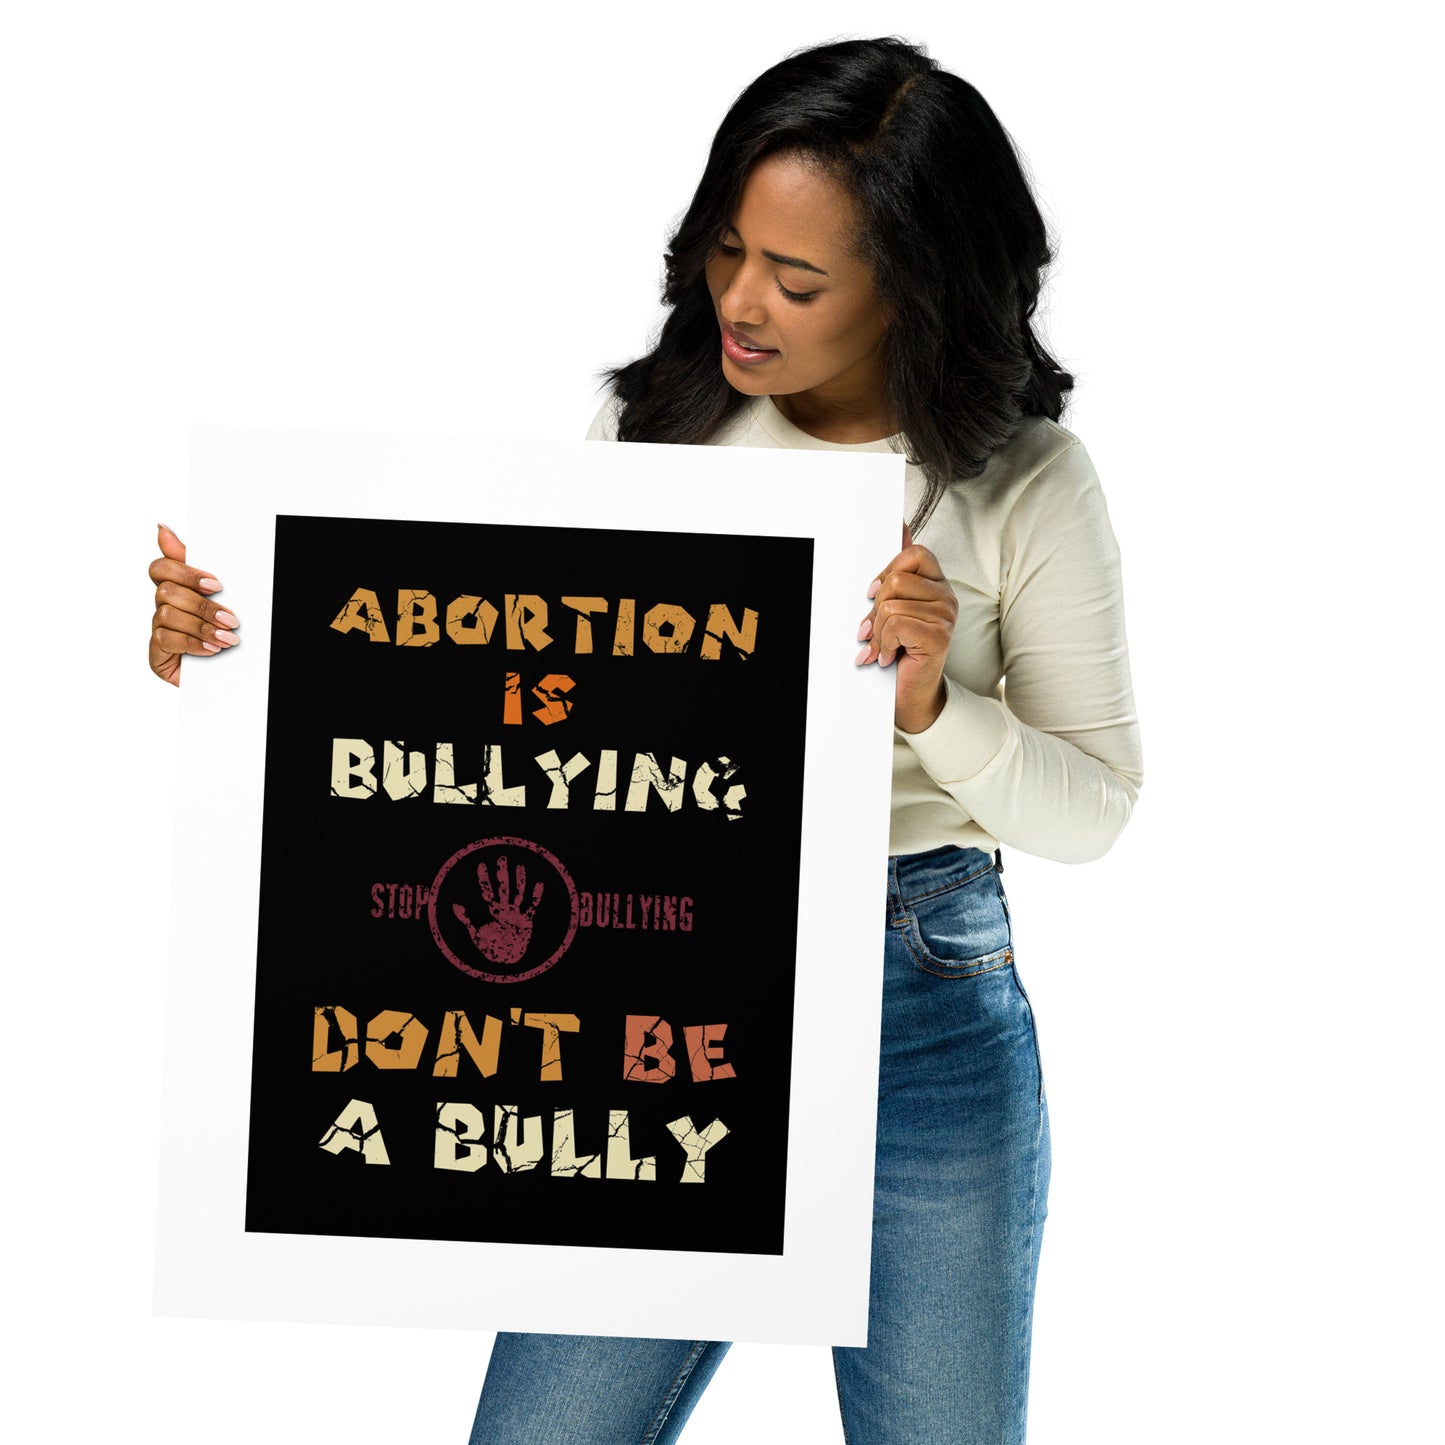 A001 Art Print - Museum Quality Giclée Print Featuring Stop-Hand Graphic with text “Abortion is Bullying. Don’t be a Bully.”